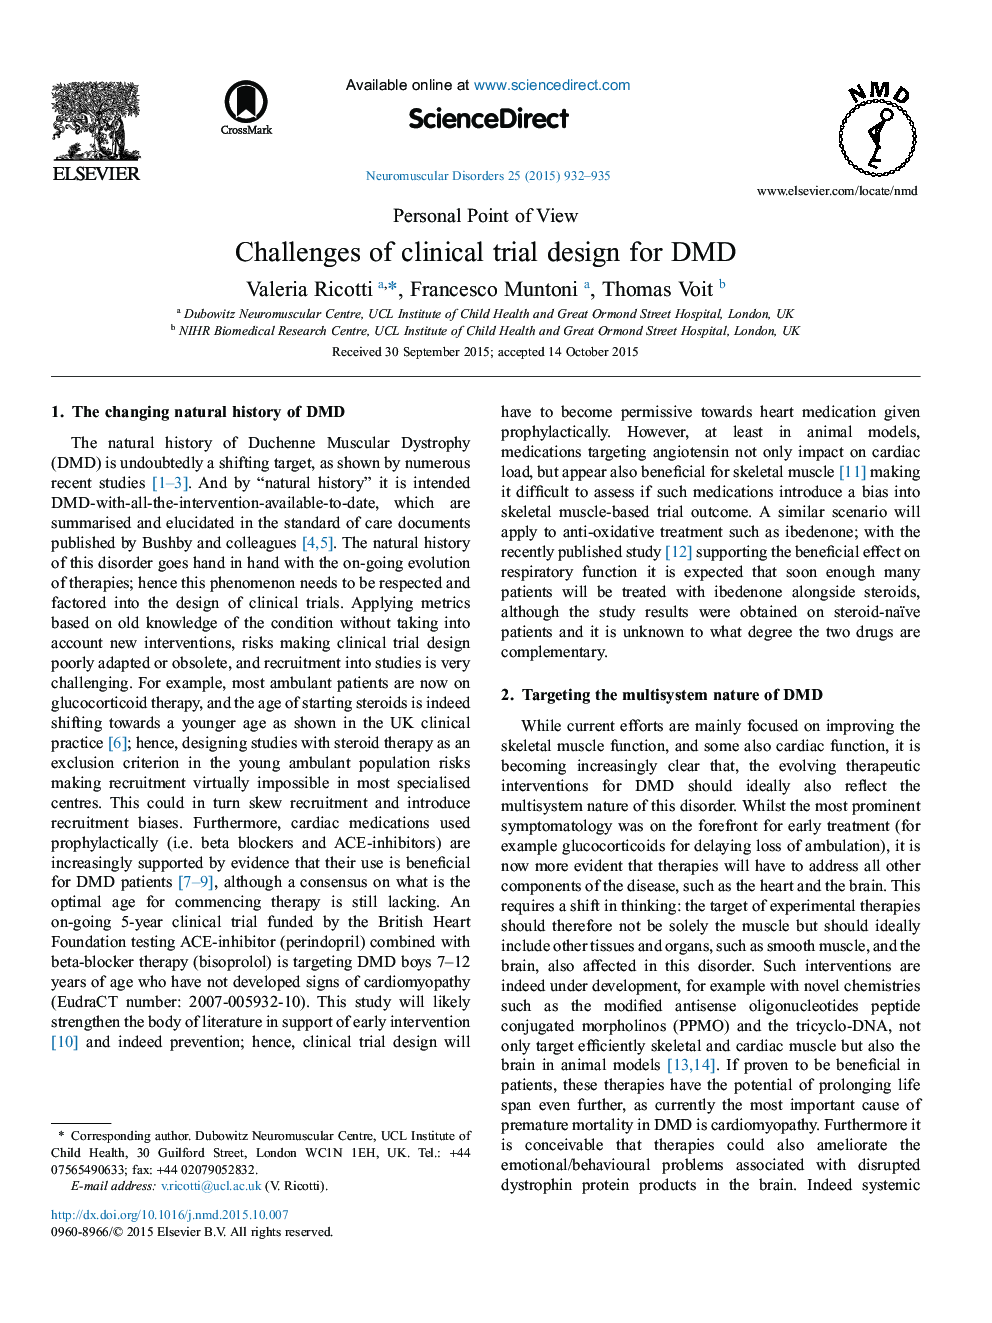 Challenges of clinical trial design for DMD